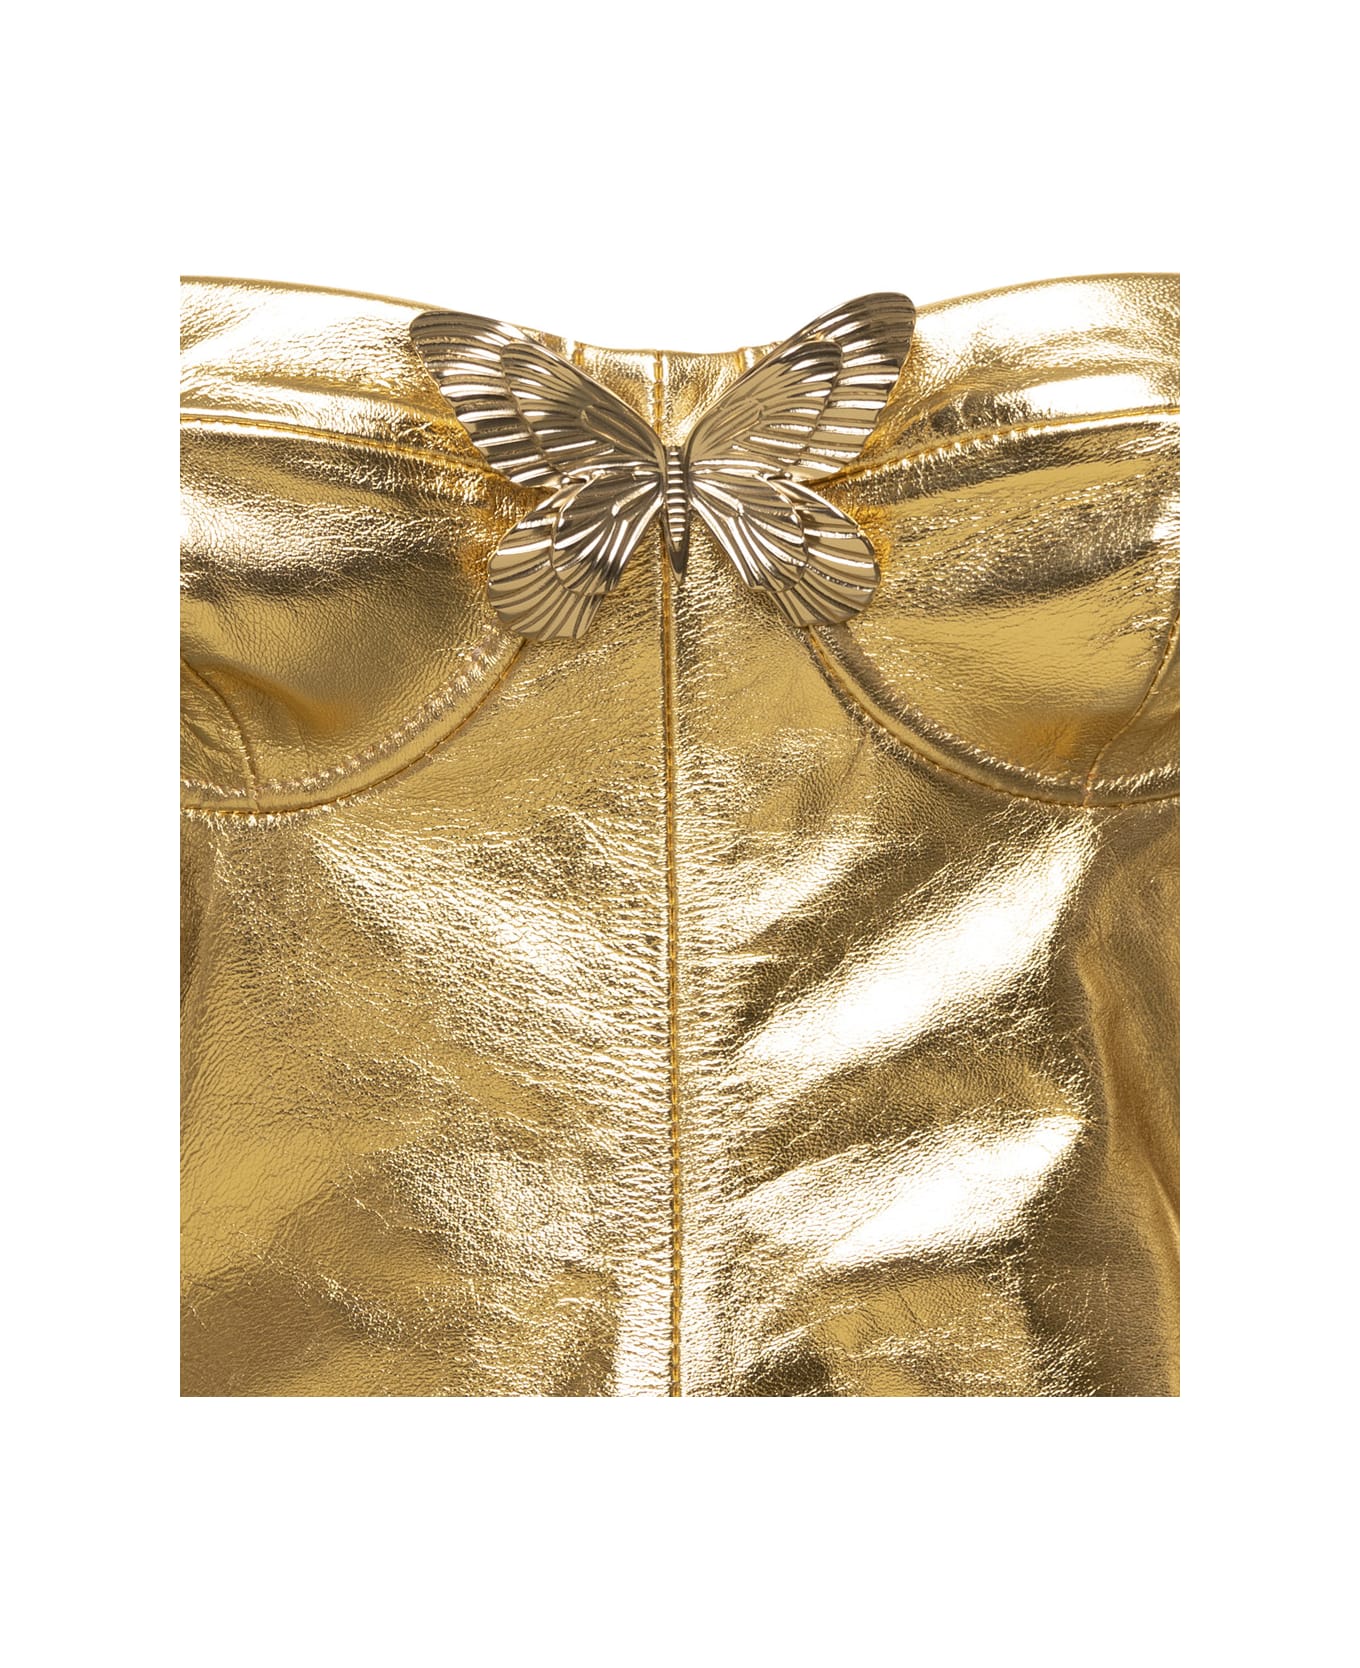 Blumarine Gold Bustier Top With Butterfly Detail In Laminated Leather Woman - Metallic